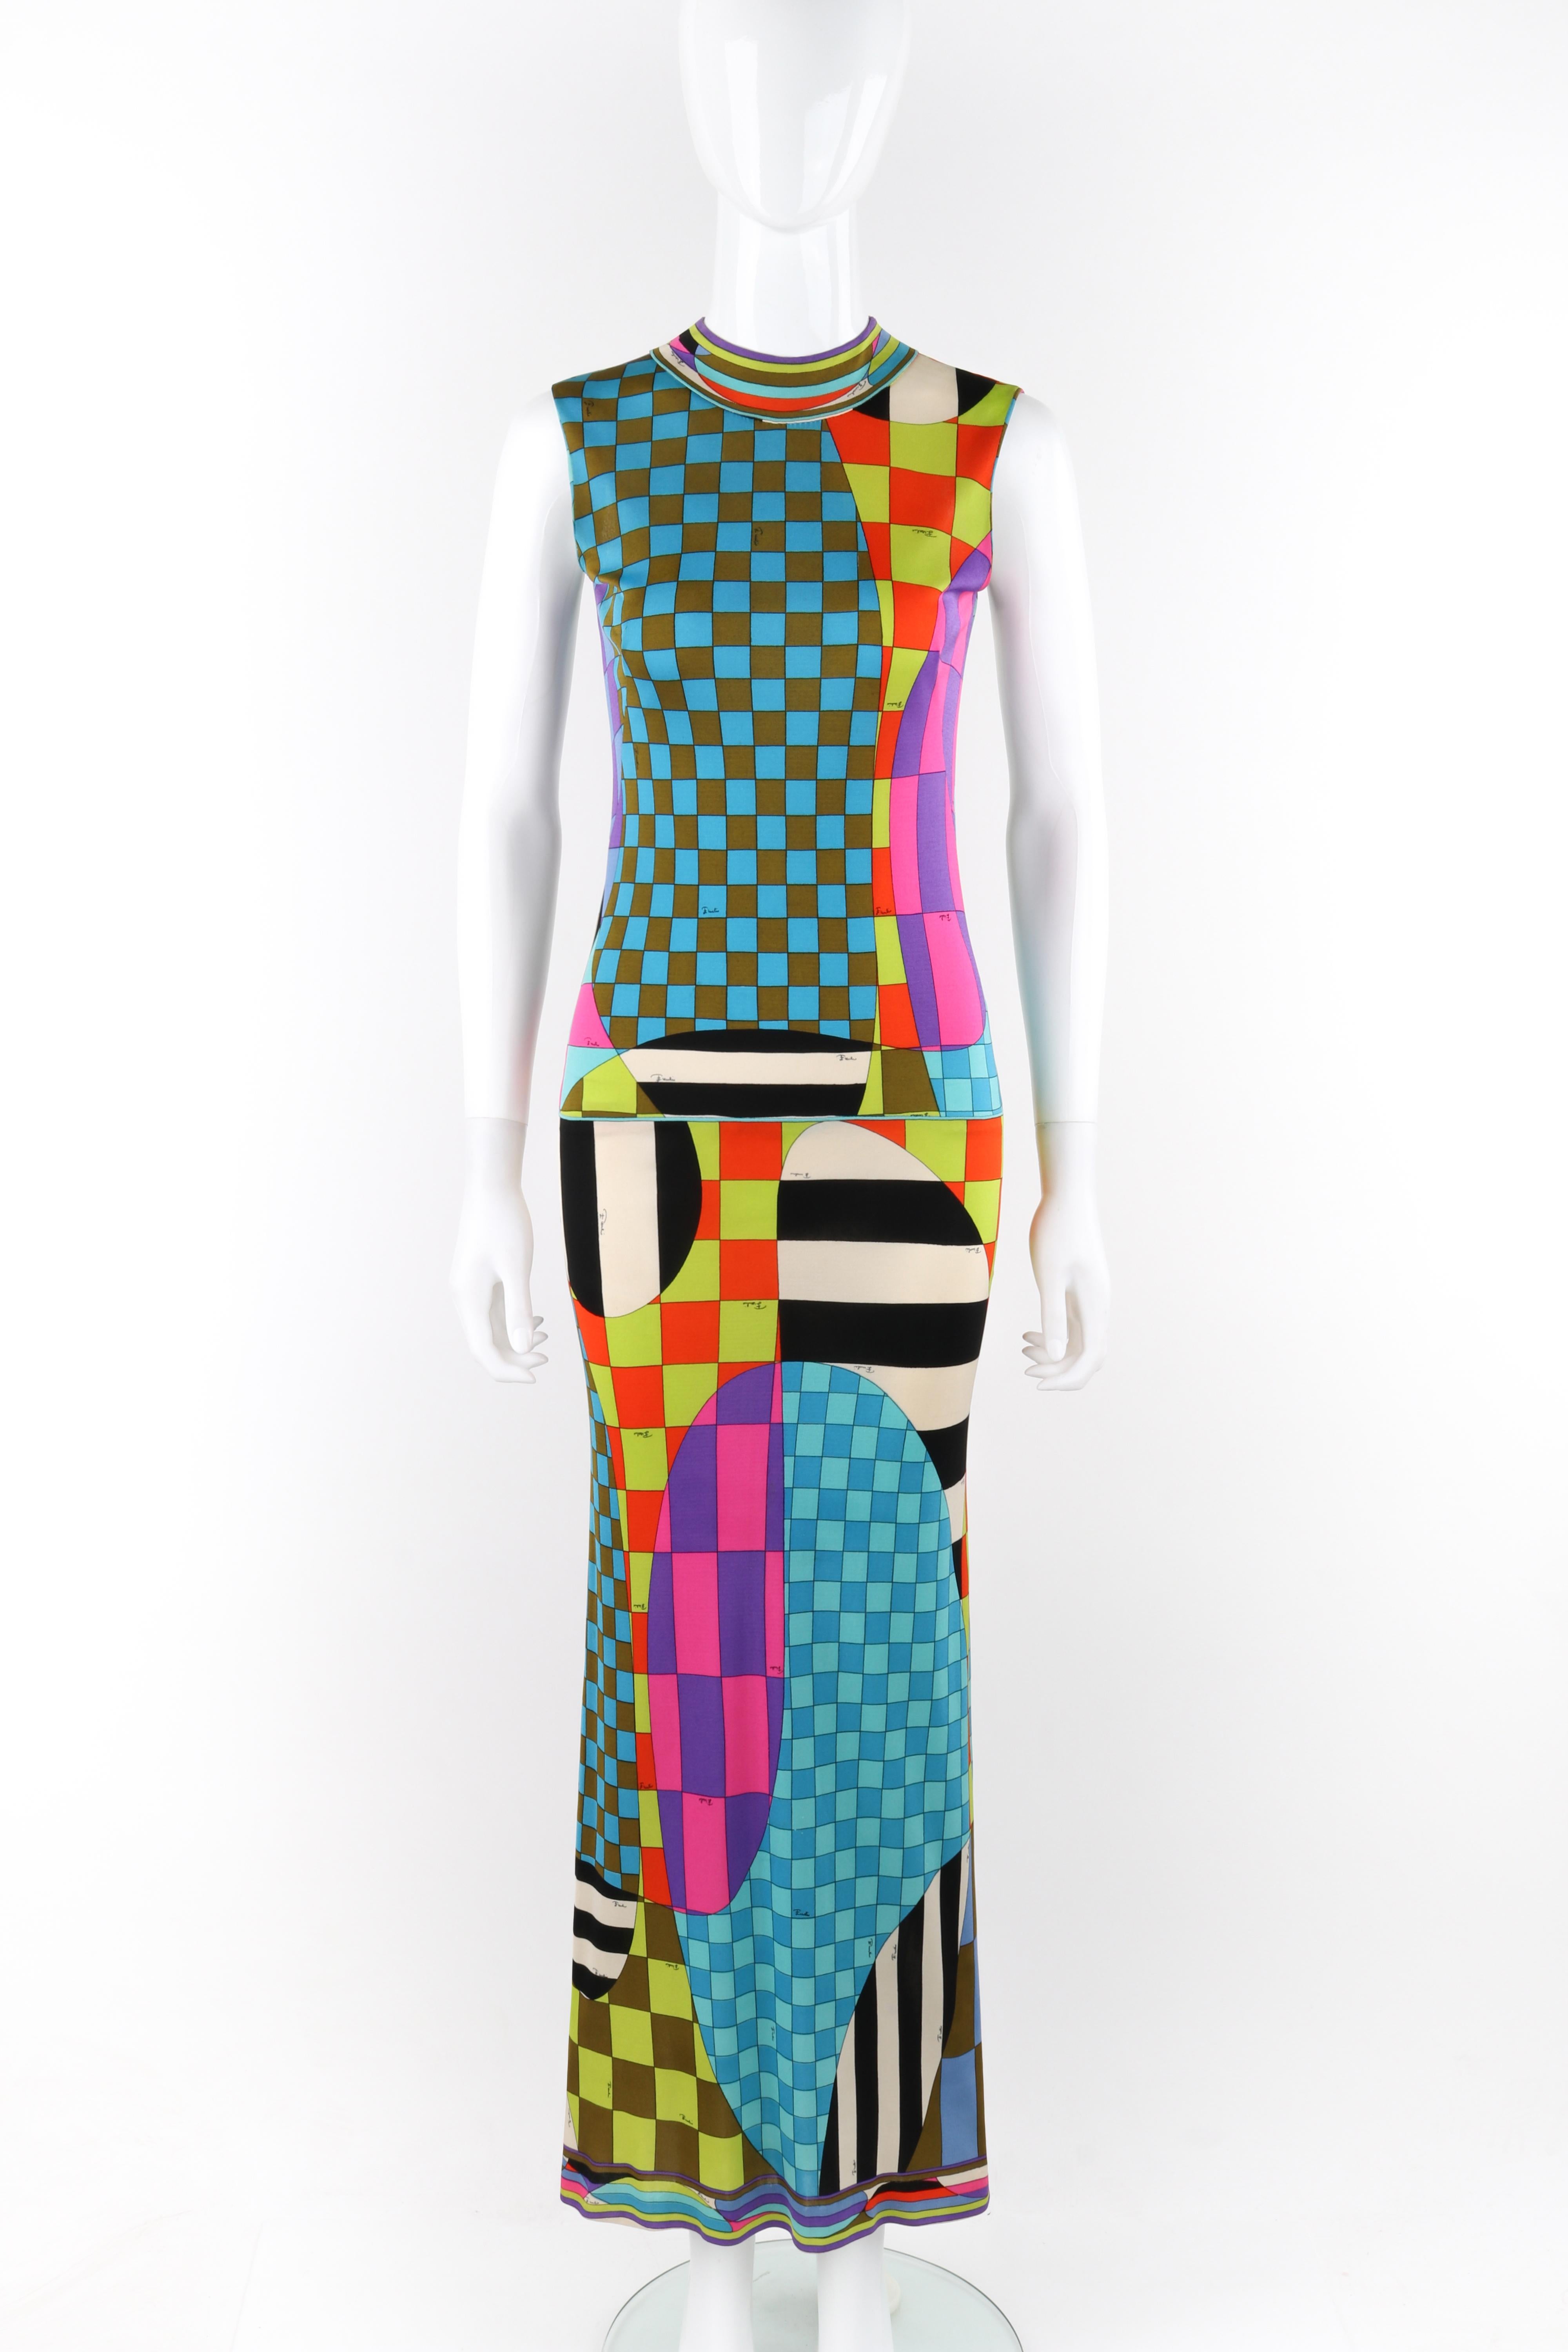 EMILIO PUCCI c.1970's Multicolor Op Art Check Striped Mock-Neck Sleeveless Dress

Brand / Manufacturer: Emilio Pucci
Circa: 1970's
Designer: Emilio Pucci 
Style: Maxi Dress
Color(s): Shades of black, white, green, orange, pink, purple, blue
Lined: